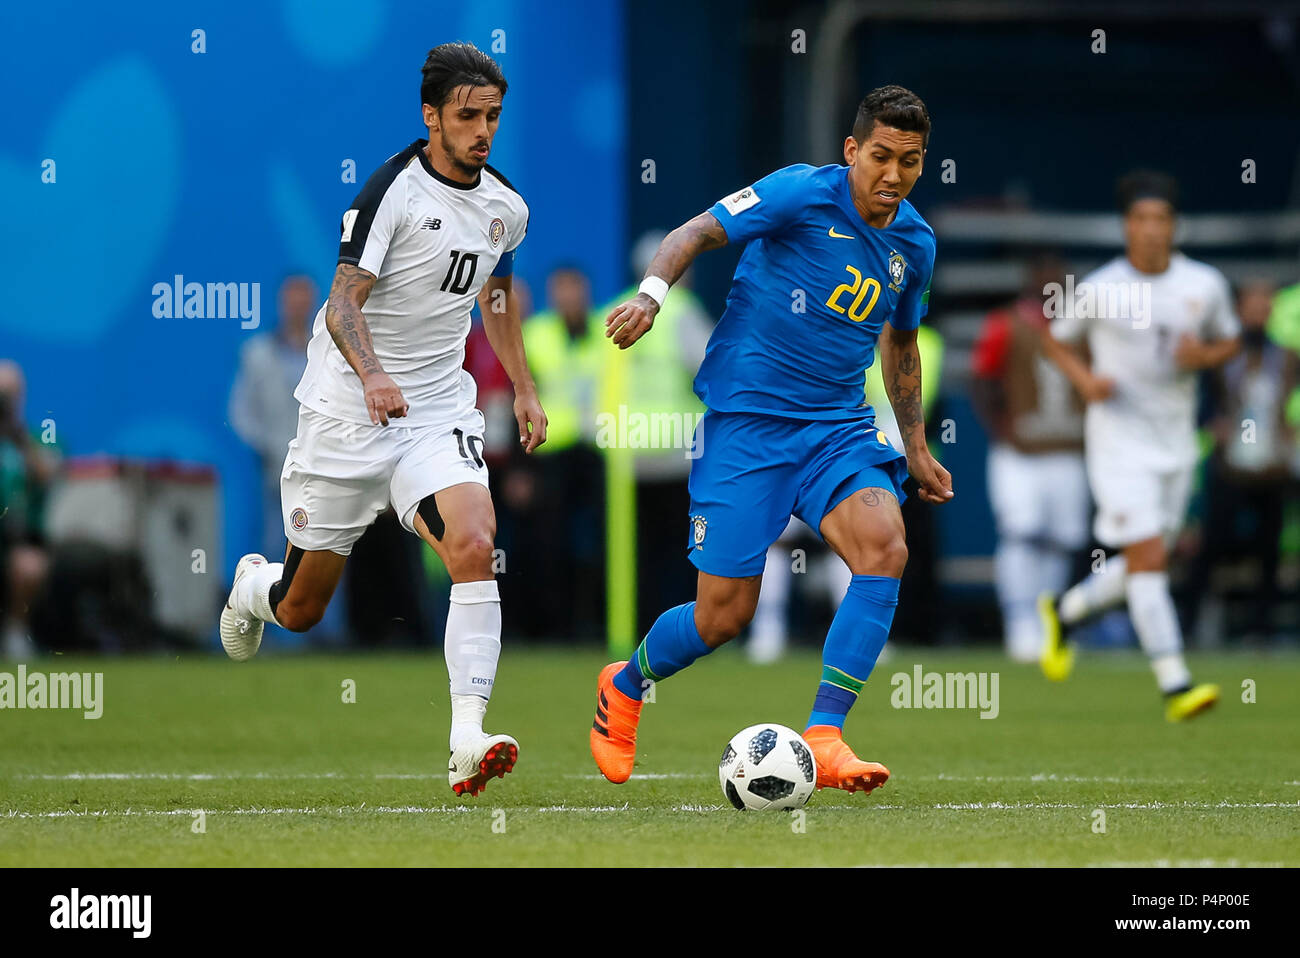 Saint Petersburg, Russia. 22nd June 2018. Roberto Firmino of Brazil and Bryan Ruiz of Costa Rica during the 2018 FIFA World Cup Group E match between Brazil and Costa Rica at Saint Petersburg Stadium on June 22nd 2018 in Saint Petersburg, Russia. (Photo by Daniel Chesterton/phcimages.com) Credit: PHC Images/Alamy Live News Stock Photo